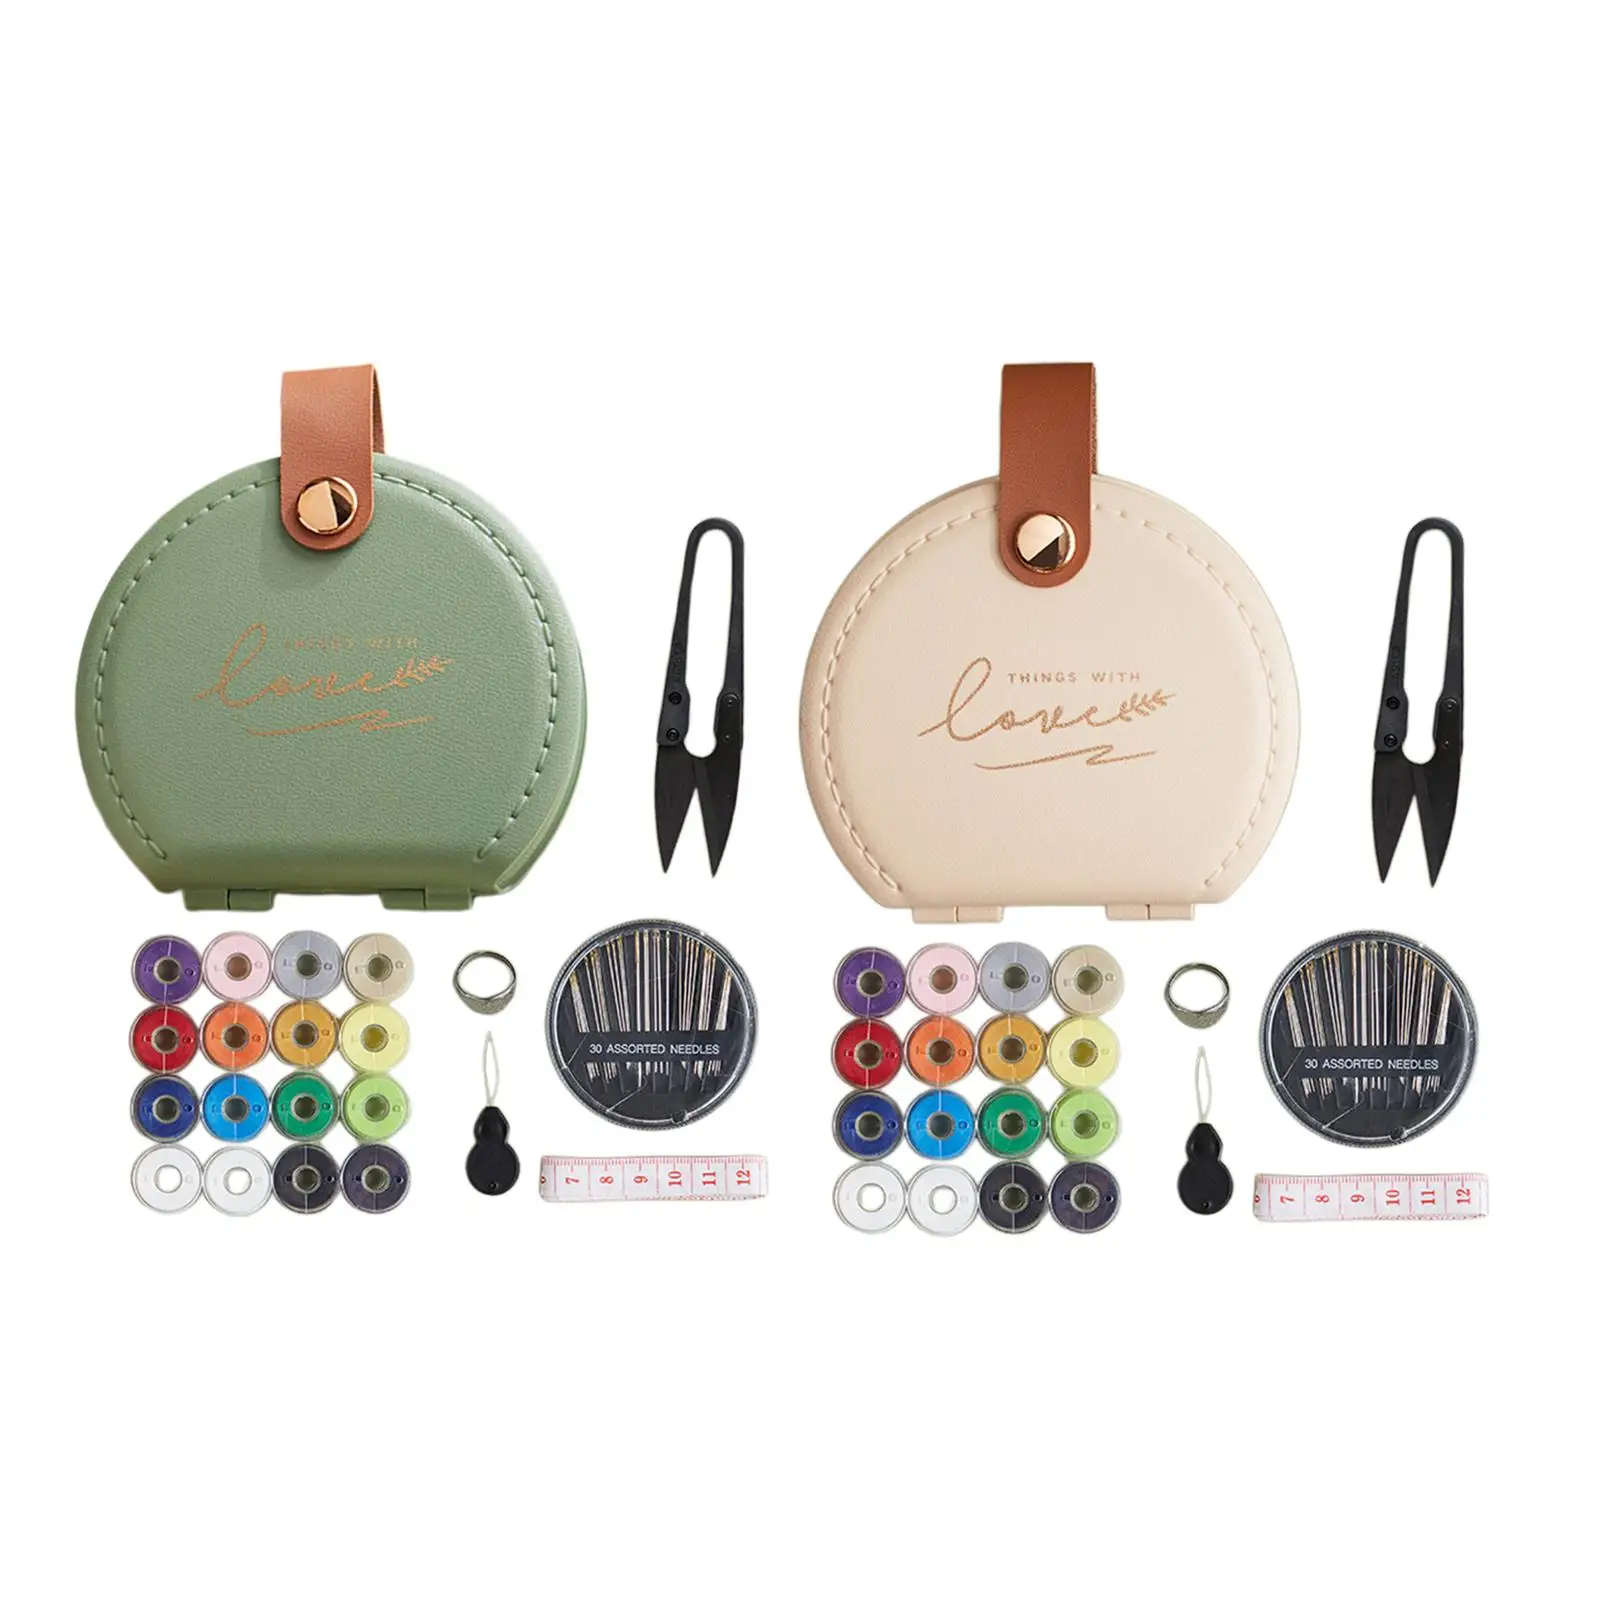 Sewing Kit Sewing Accessories Tape Measure Threader PU Leather Case Basic Sewing Repair Kits for Travel Adults Kids